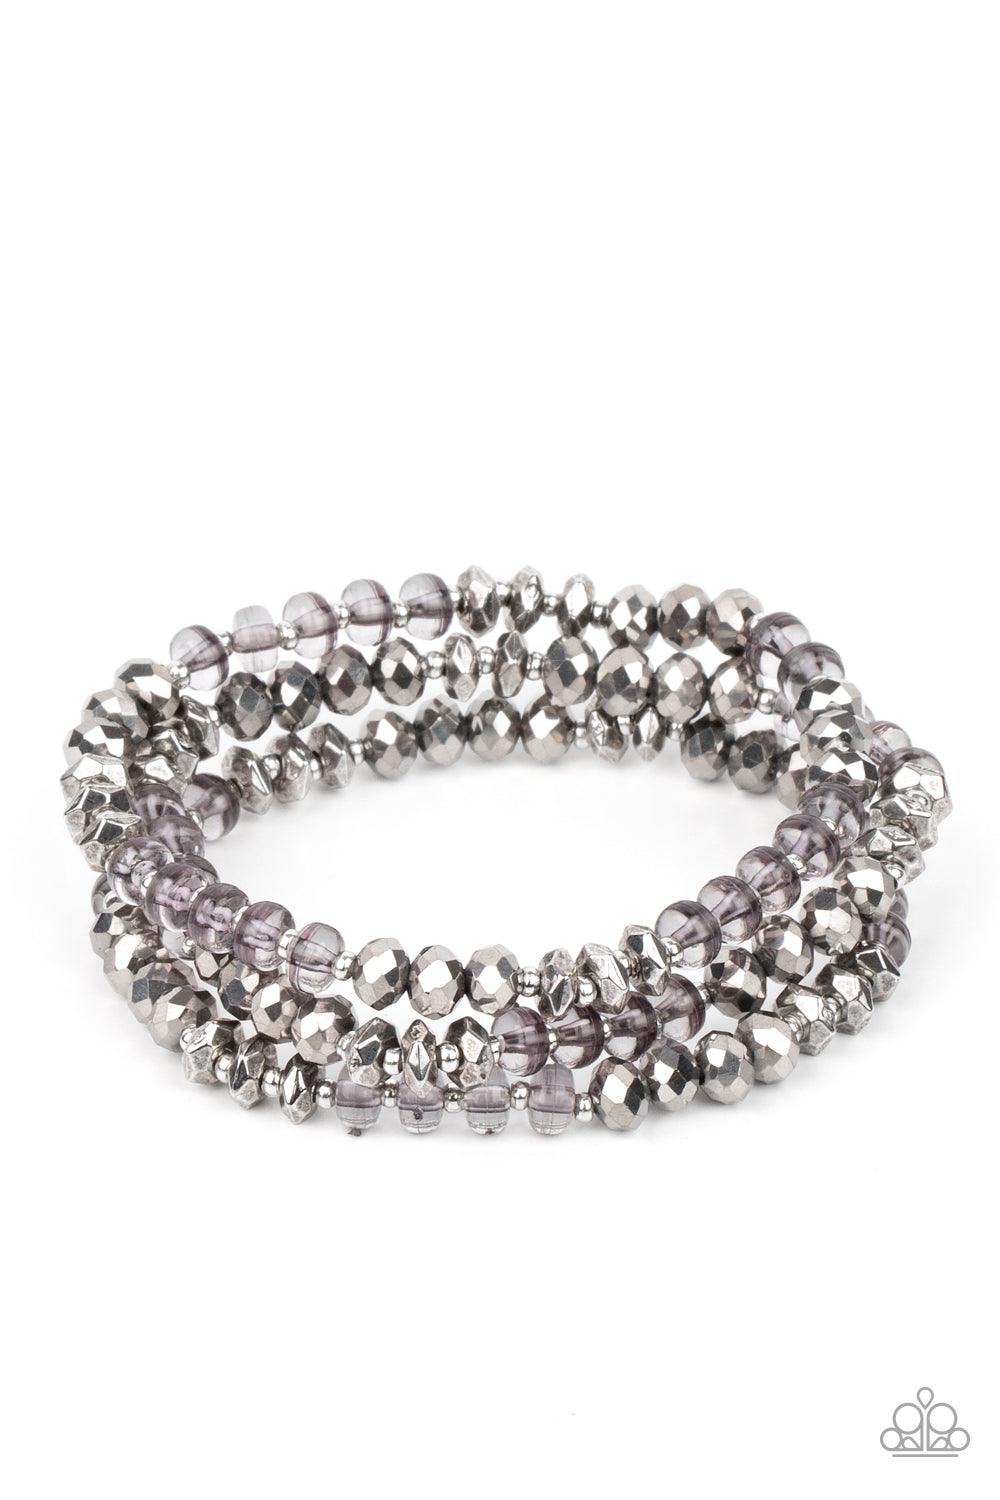 Paparazzi Accessories Stellar Strut - Silver Infused with faceted silver beads, a glamorous collection of sparkly hematite crystals and smoky beads are threaded along stretchy bands around the wrist, creating glittery layers. Sold as one set of three brac